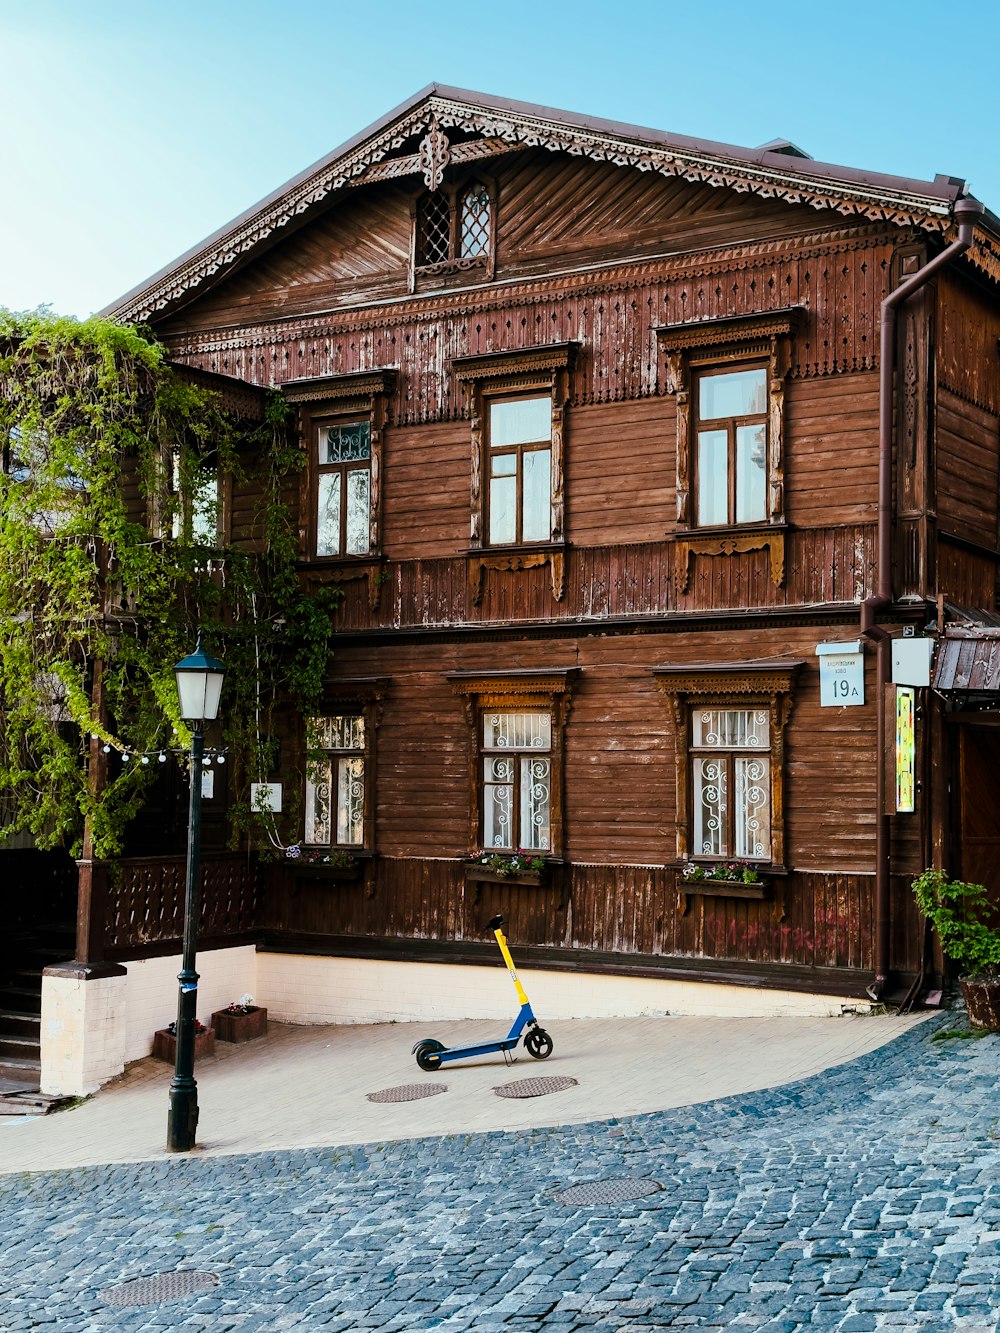 a scooter parked in front of a wooden building